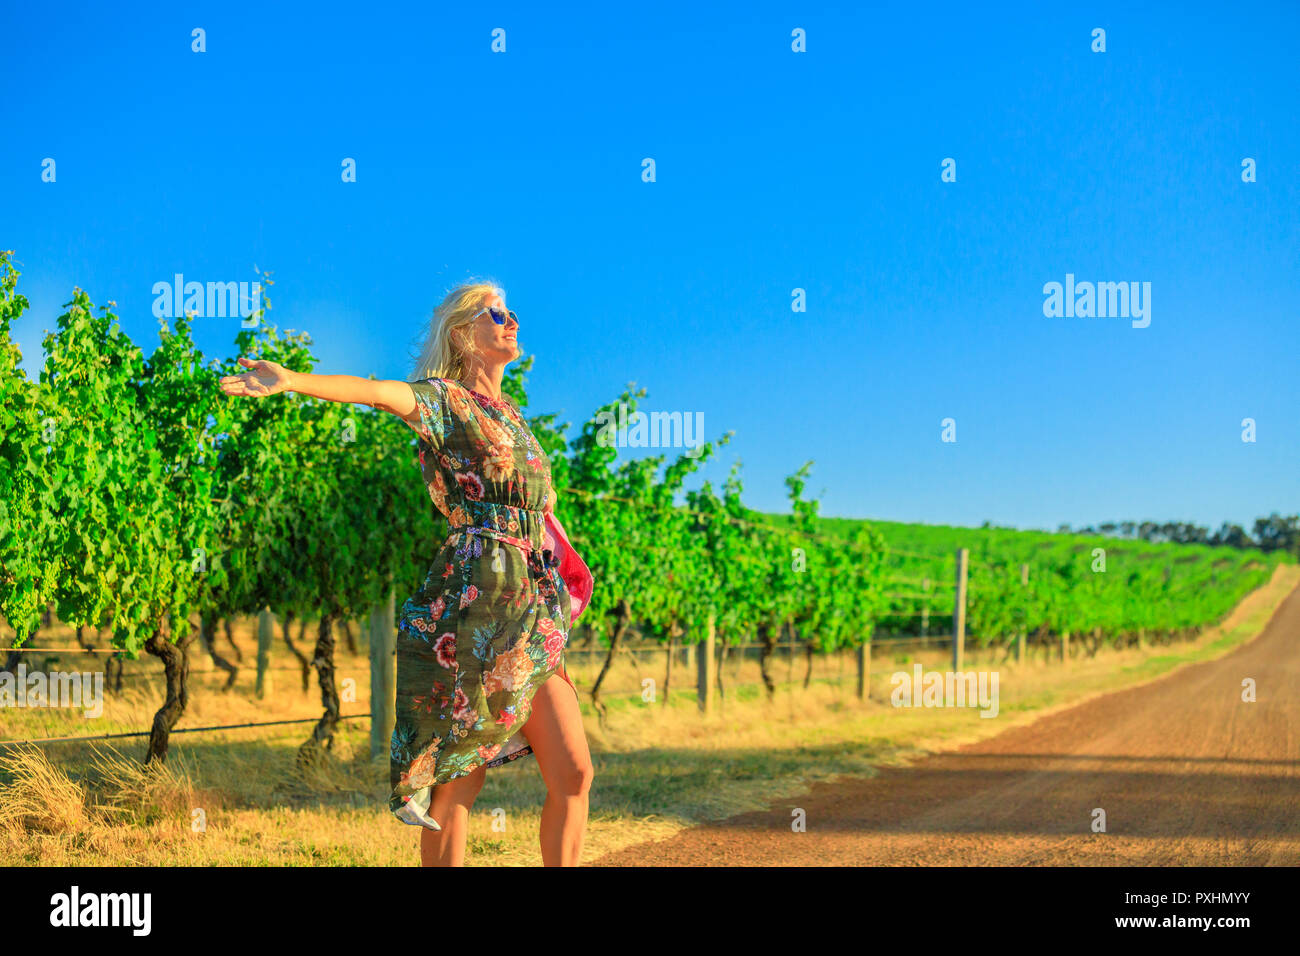 Australian vineyard. Carefree blonde woman with open arms enjoys the harvest at Wilyabrup in Margaret River known as the wine region in Western Australia. Vineyard winery grape picking. Stock Photo